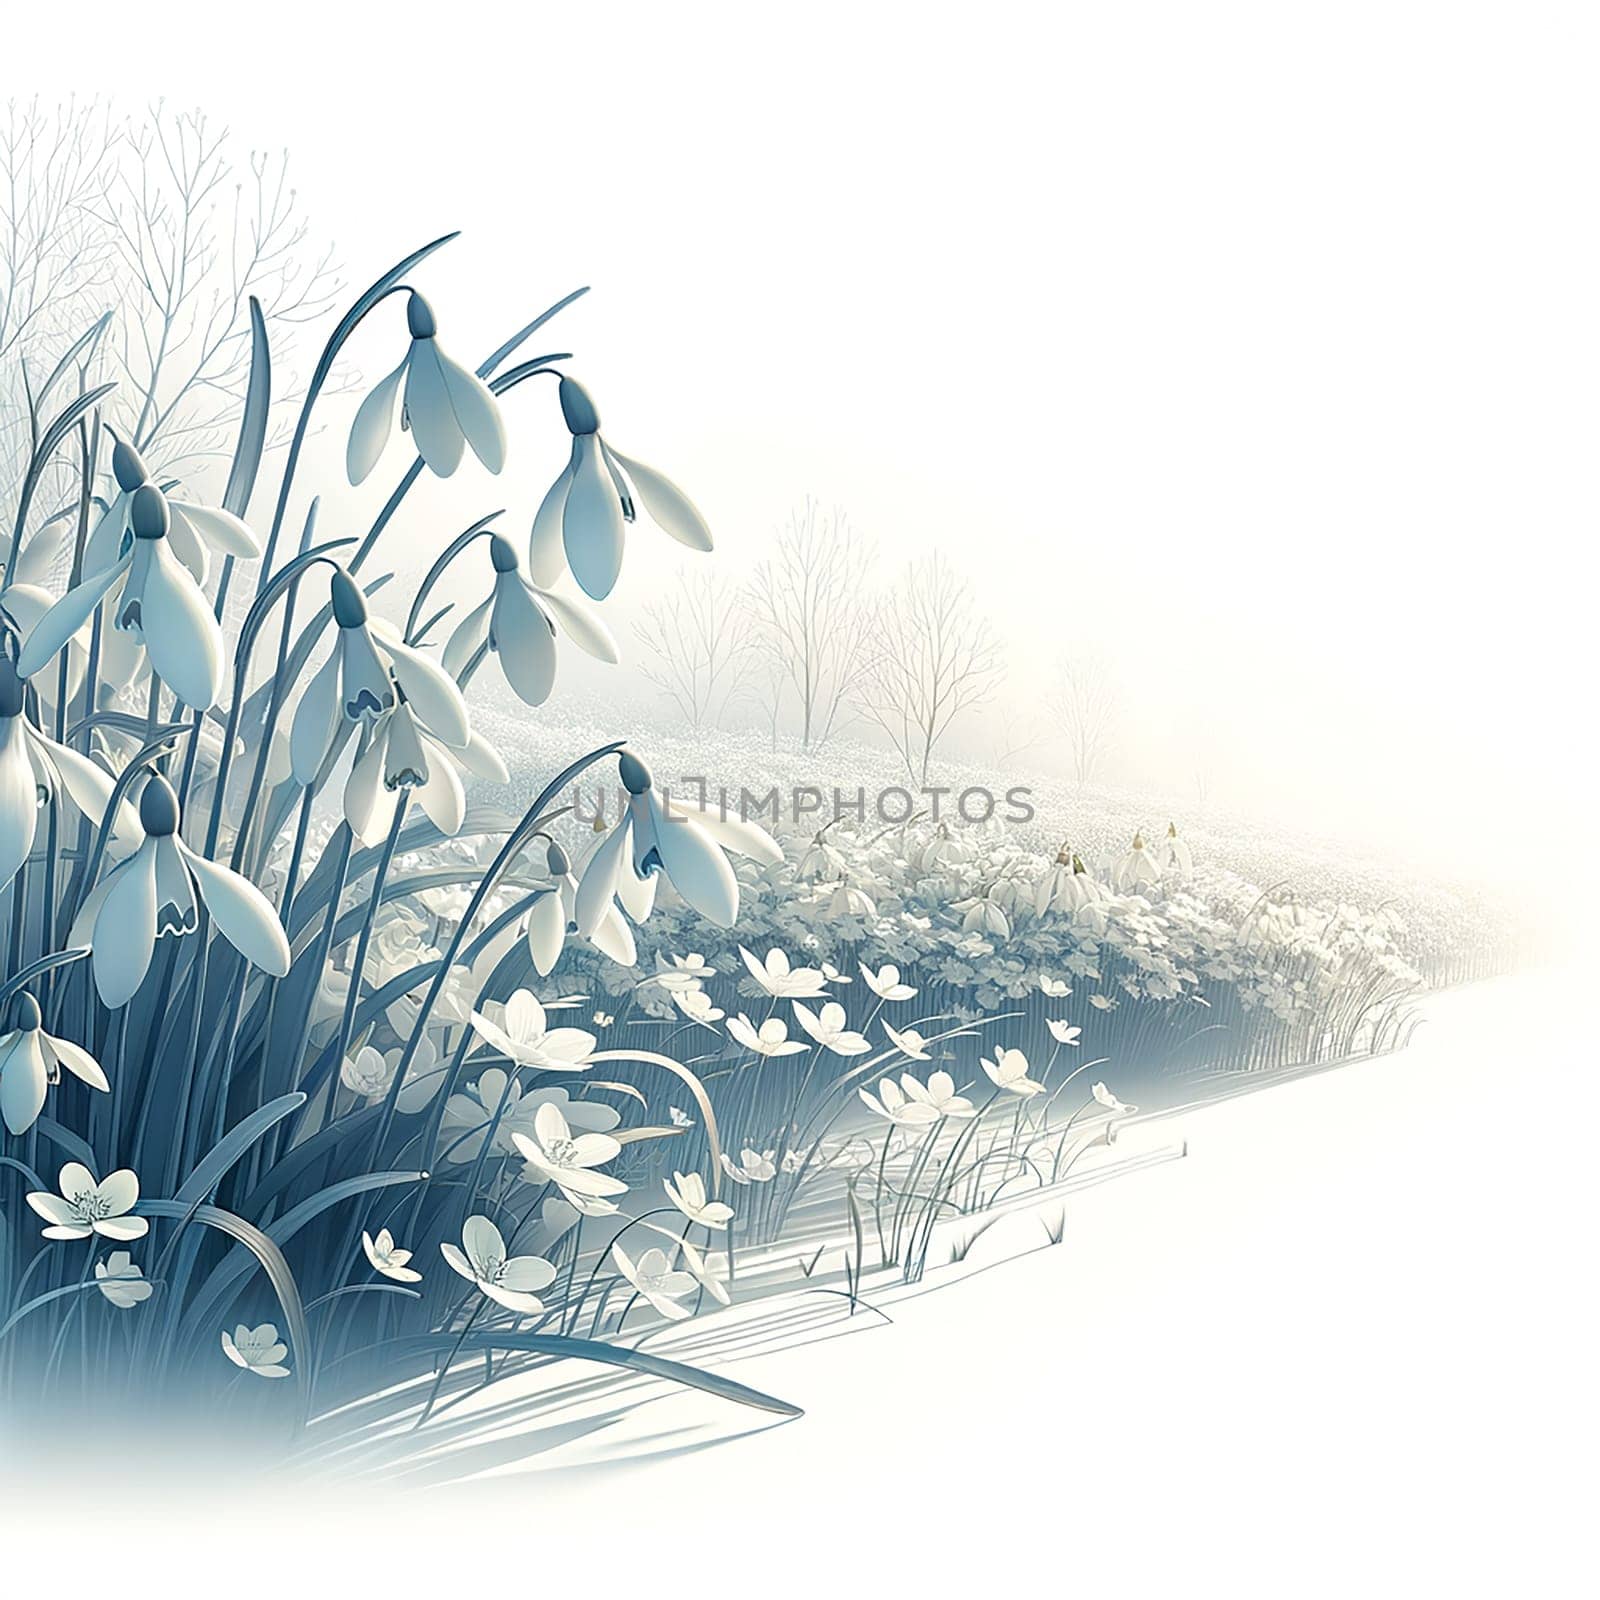 Whispers of Spring: Snowdrops in Soft-Toned Isolation by Petrichor